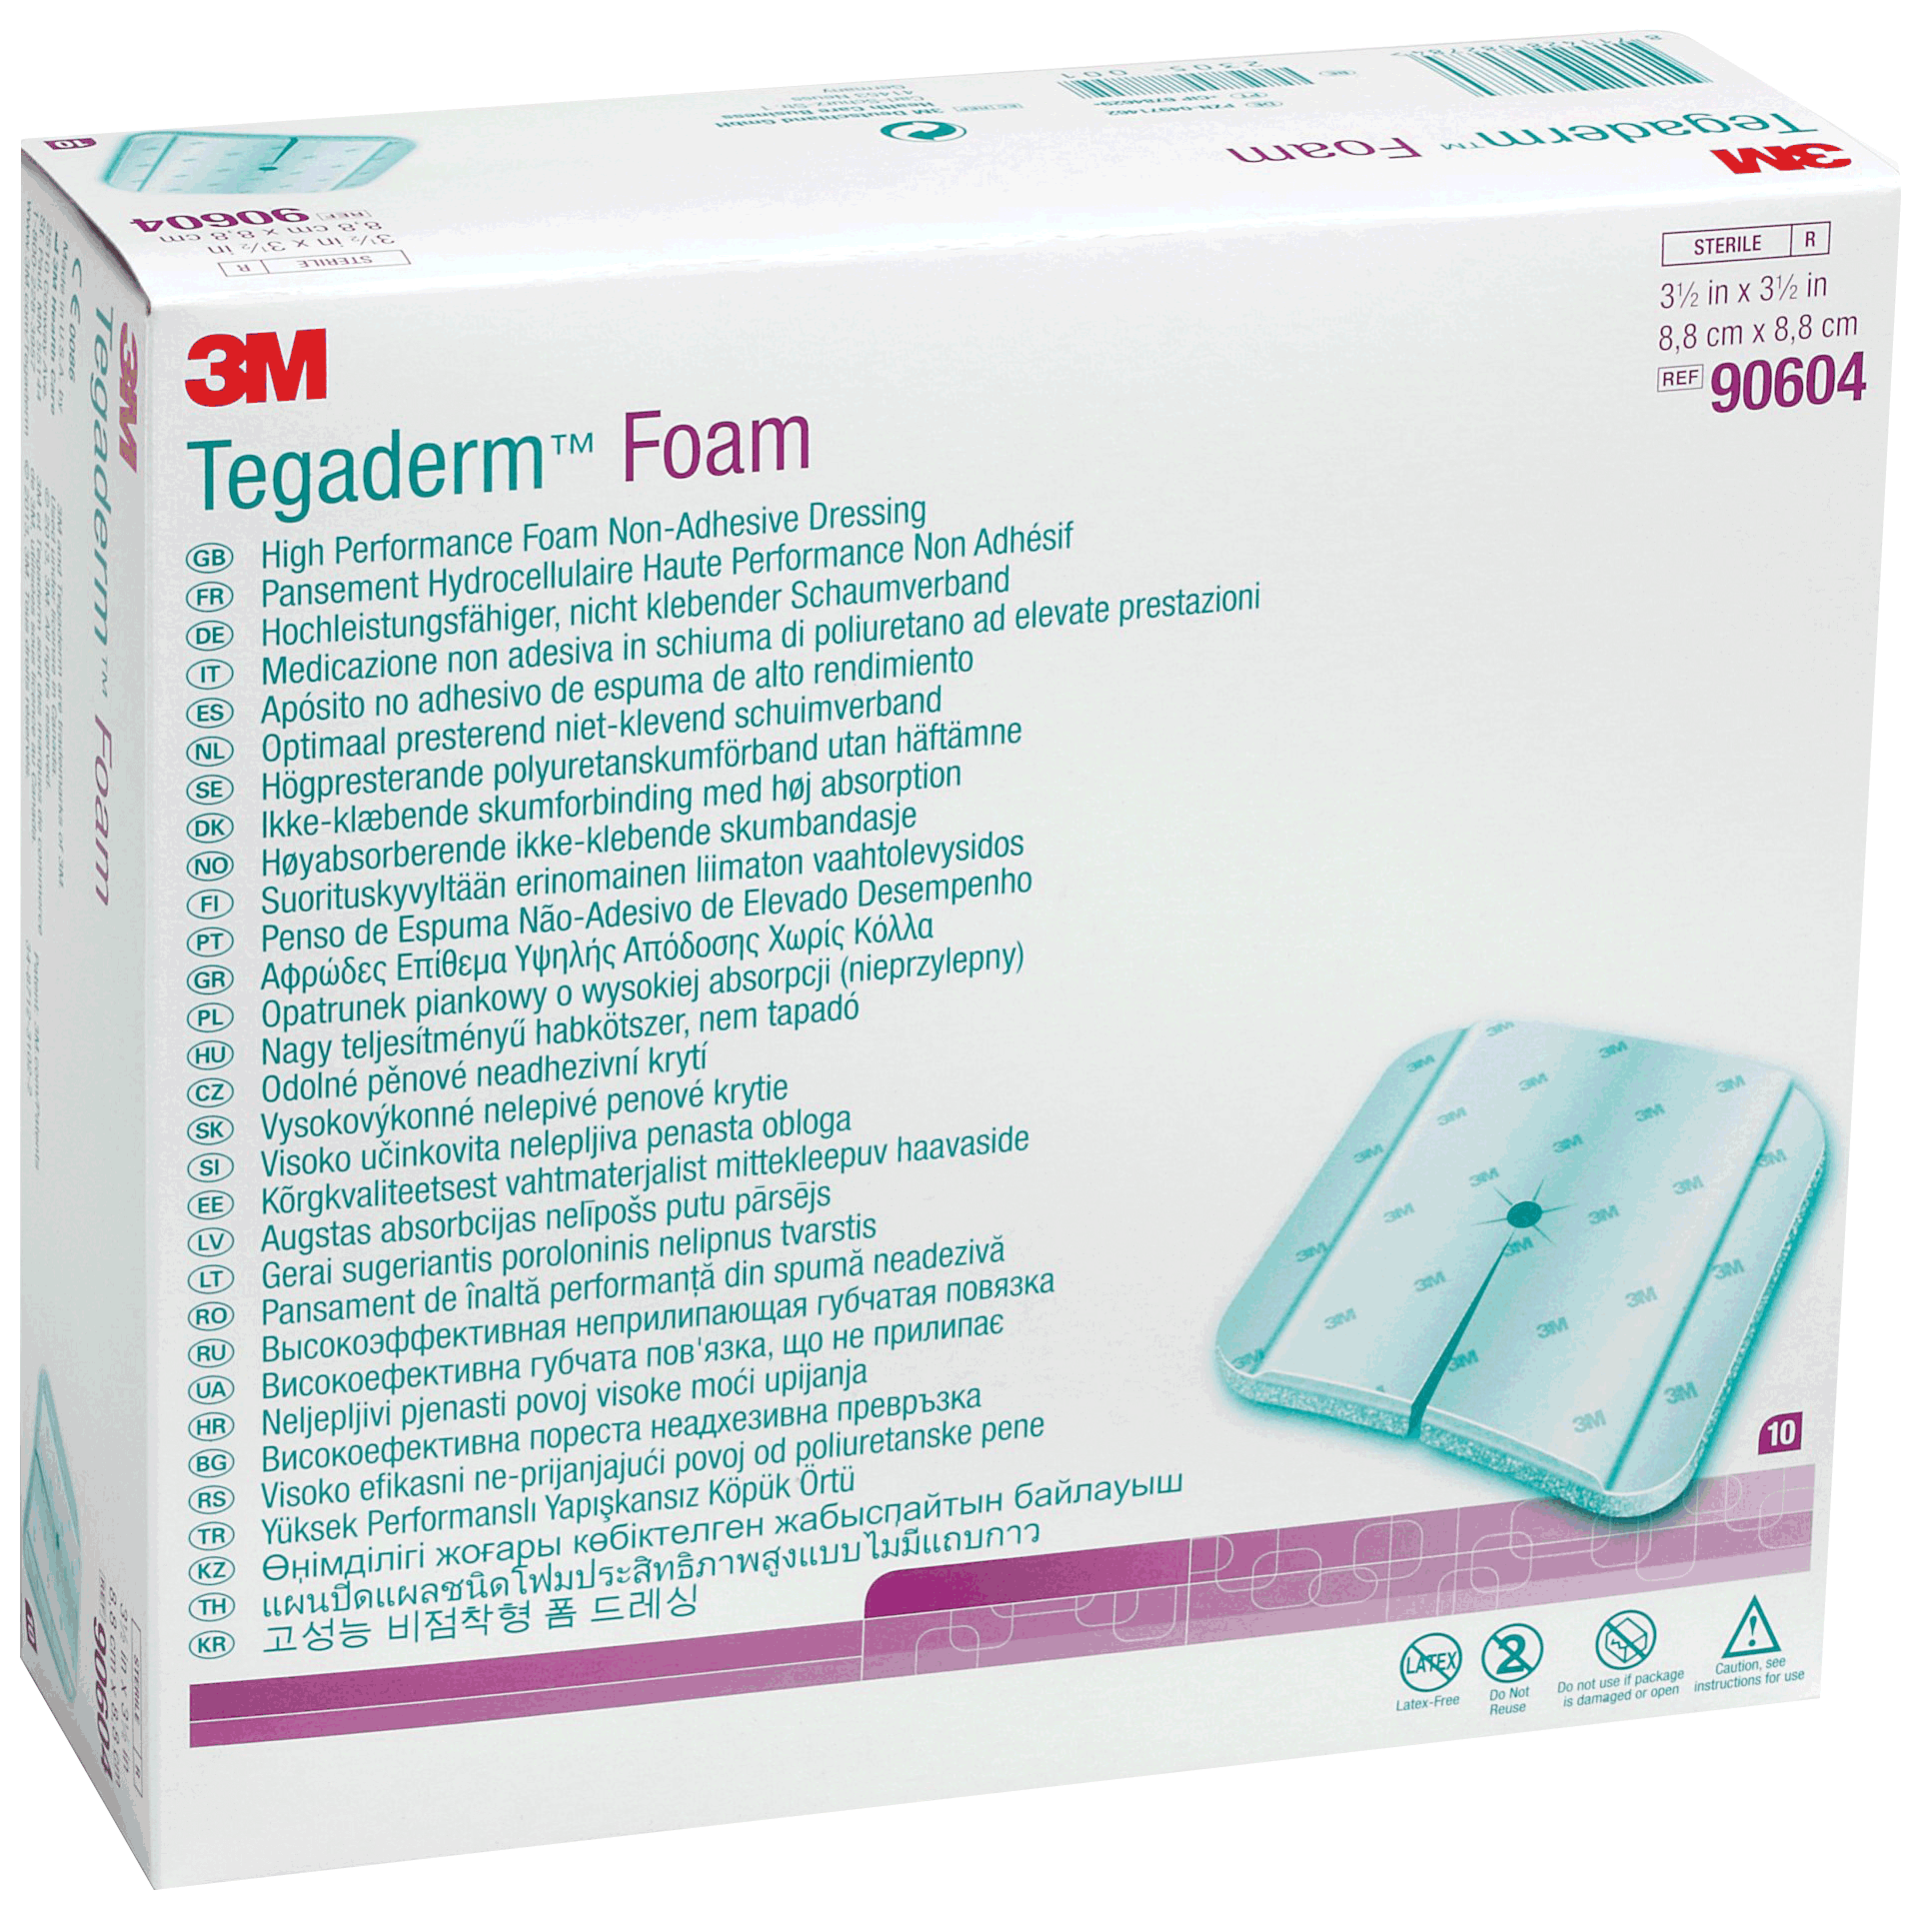 EA/1 - 3M Tegaderm&trade; Non Adhesive Foam Dressing 4" x 4" - Best Buy Medical Supplies